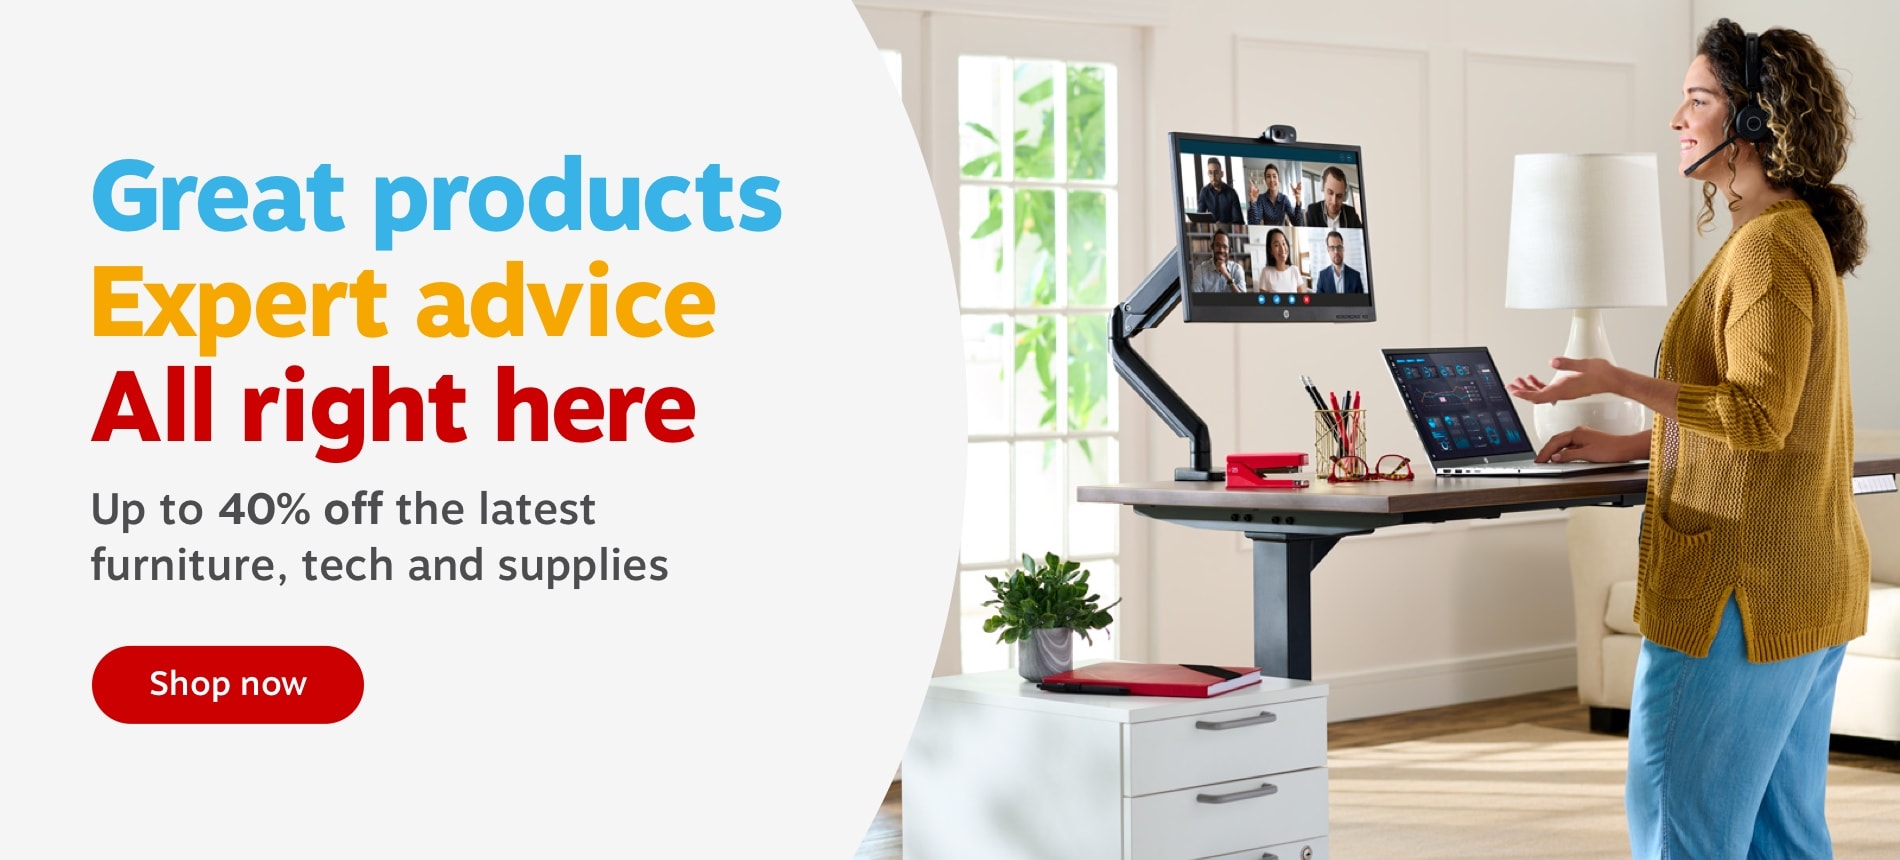 Great products Expert advice All right here Up to 40% off the latest furniture, tech and supplies 